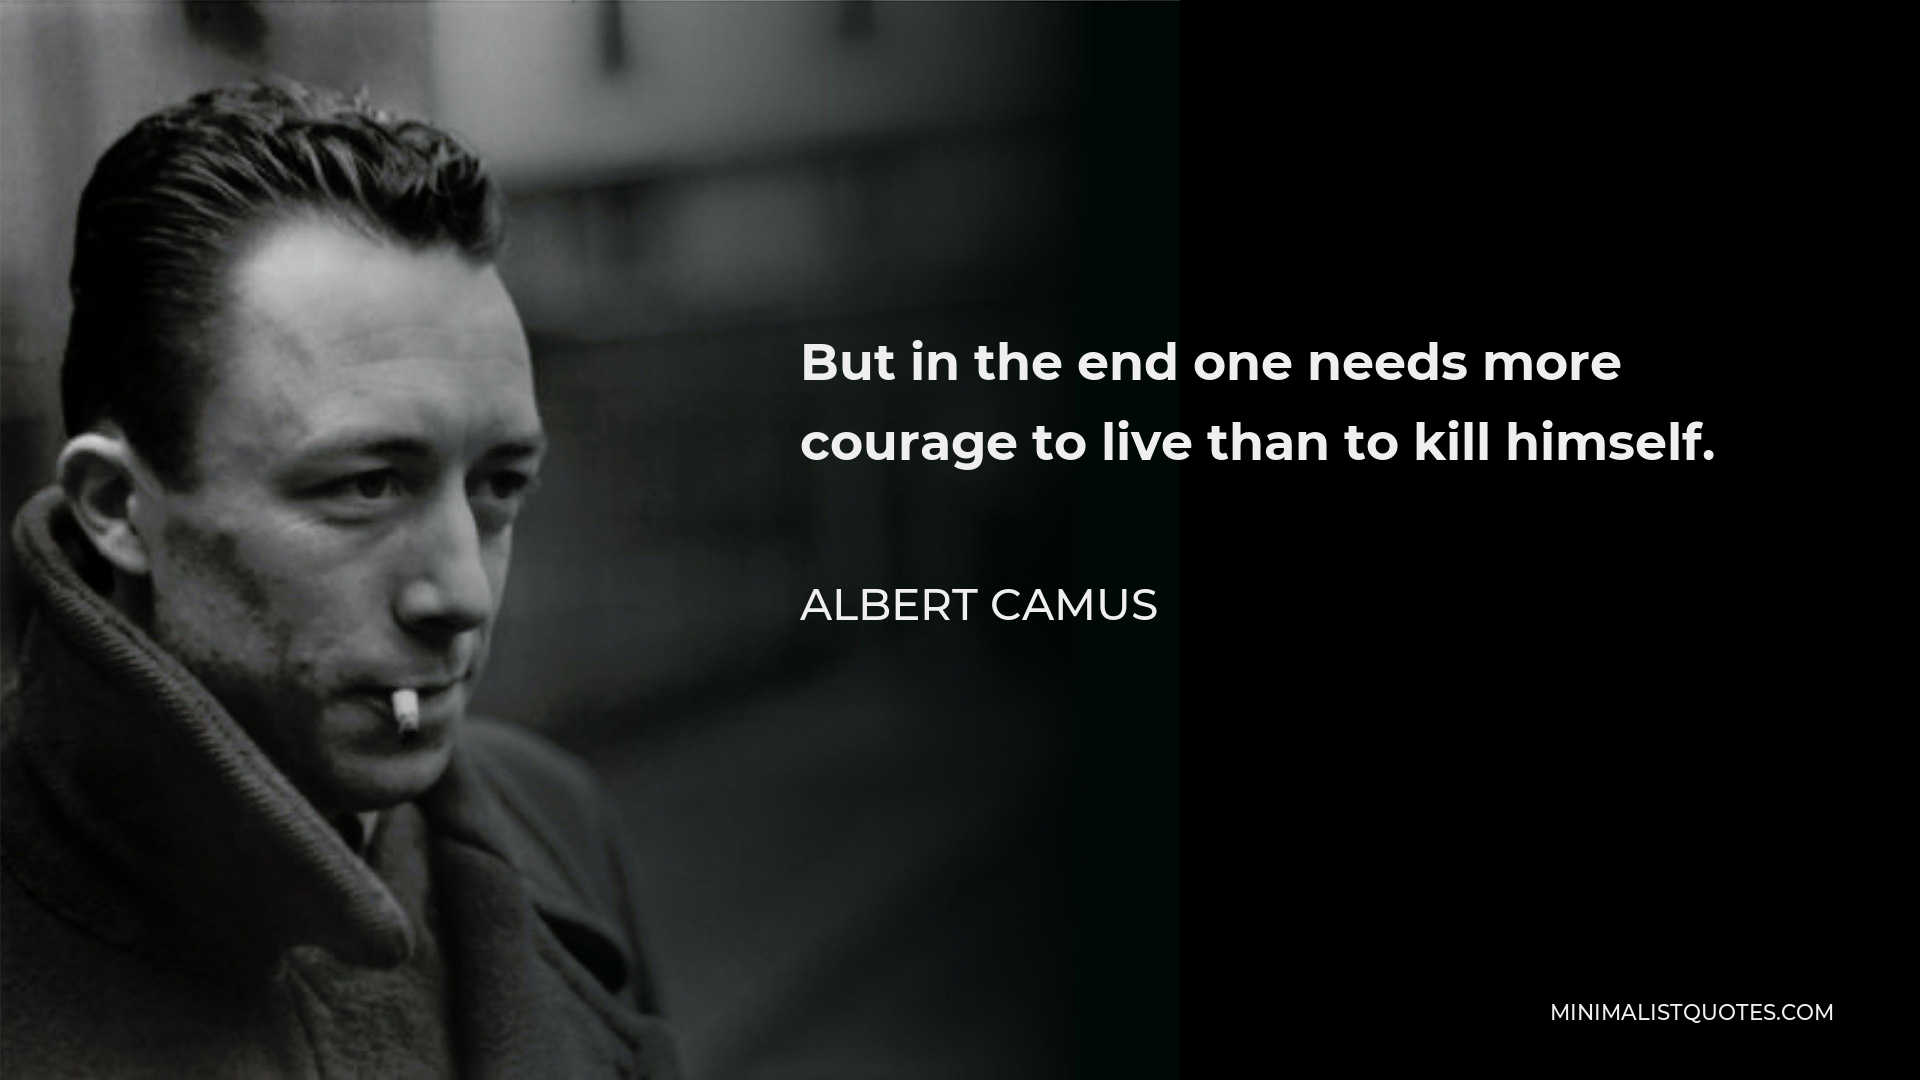 Albert Camus Quote - But in the end one needs more courage to live than to kill himself.